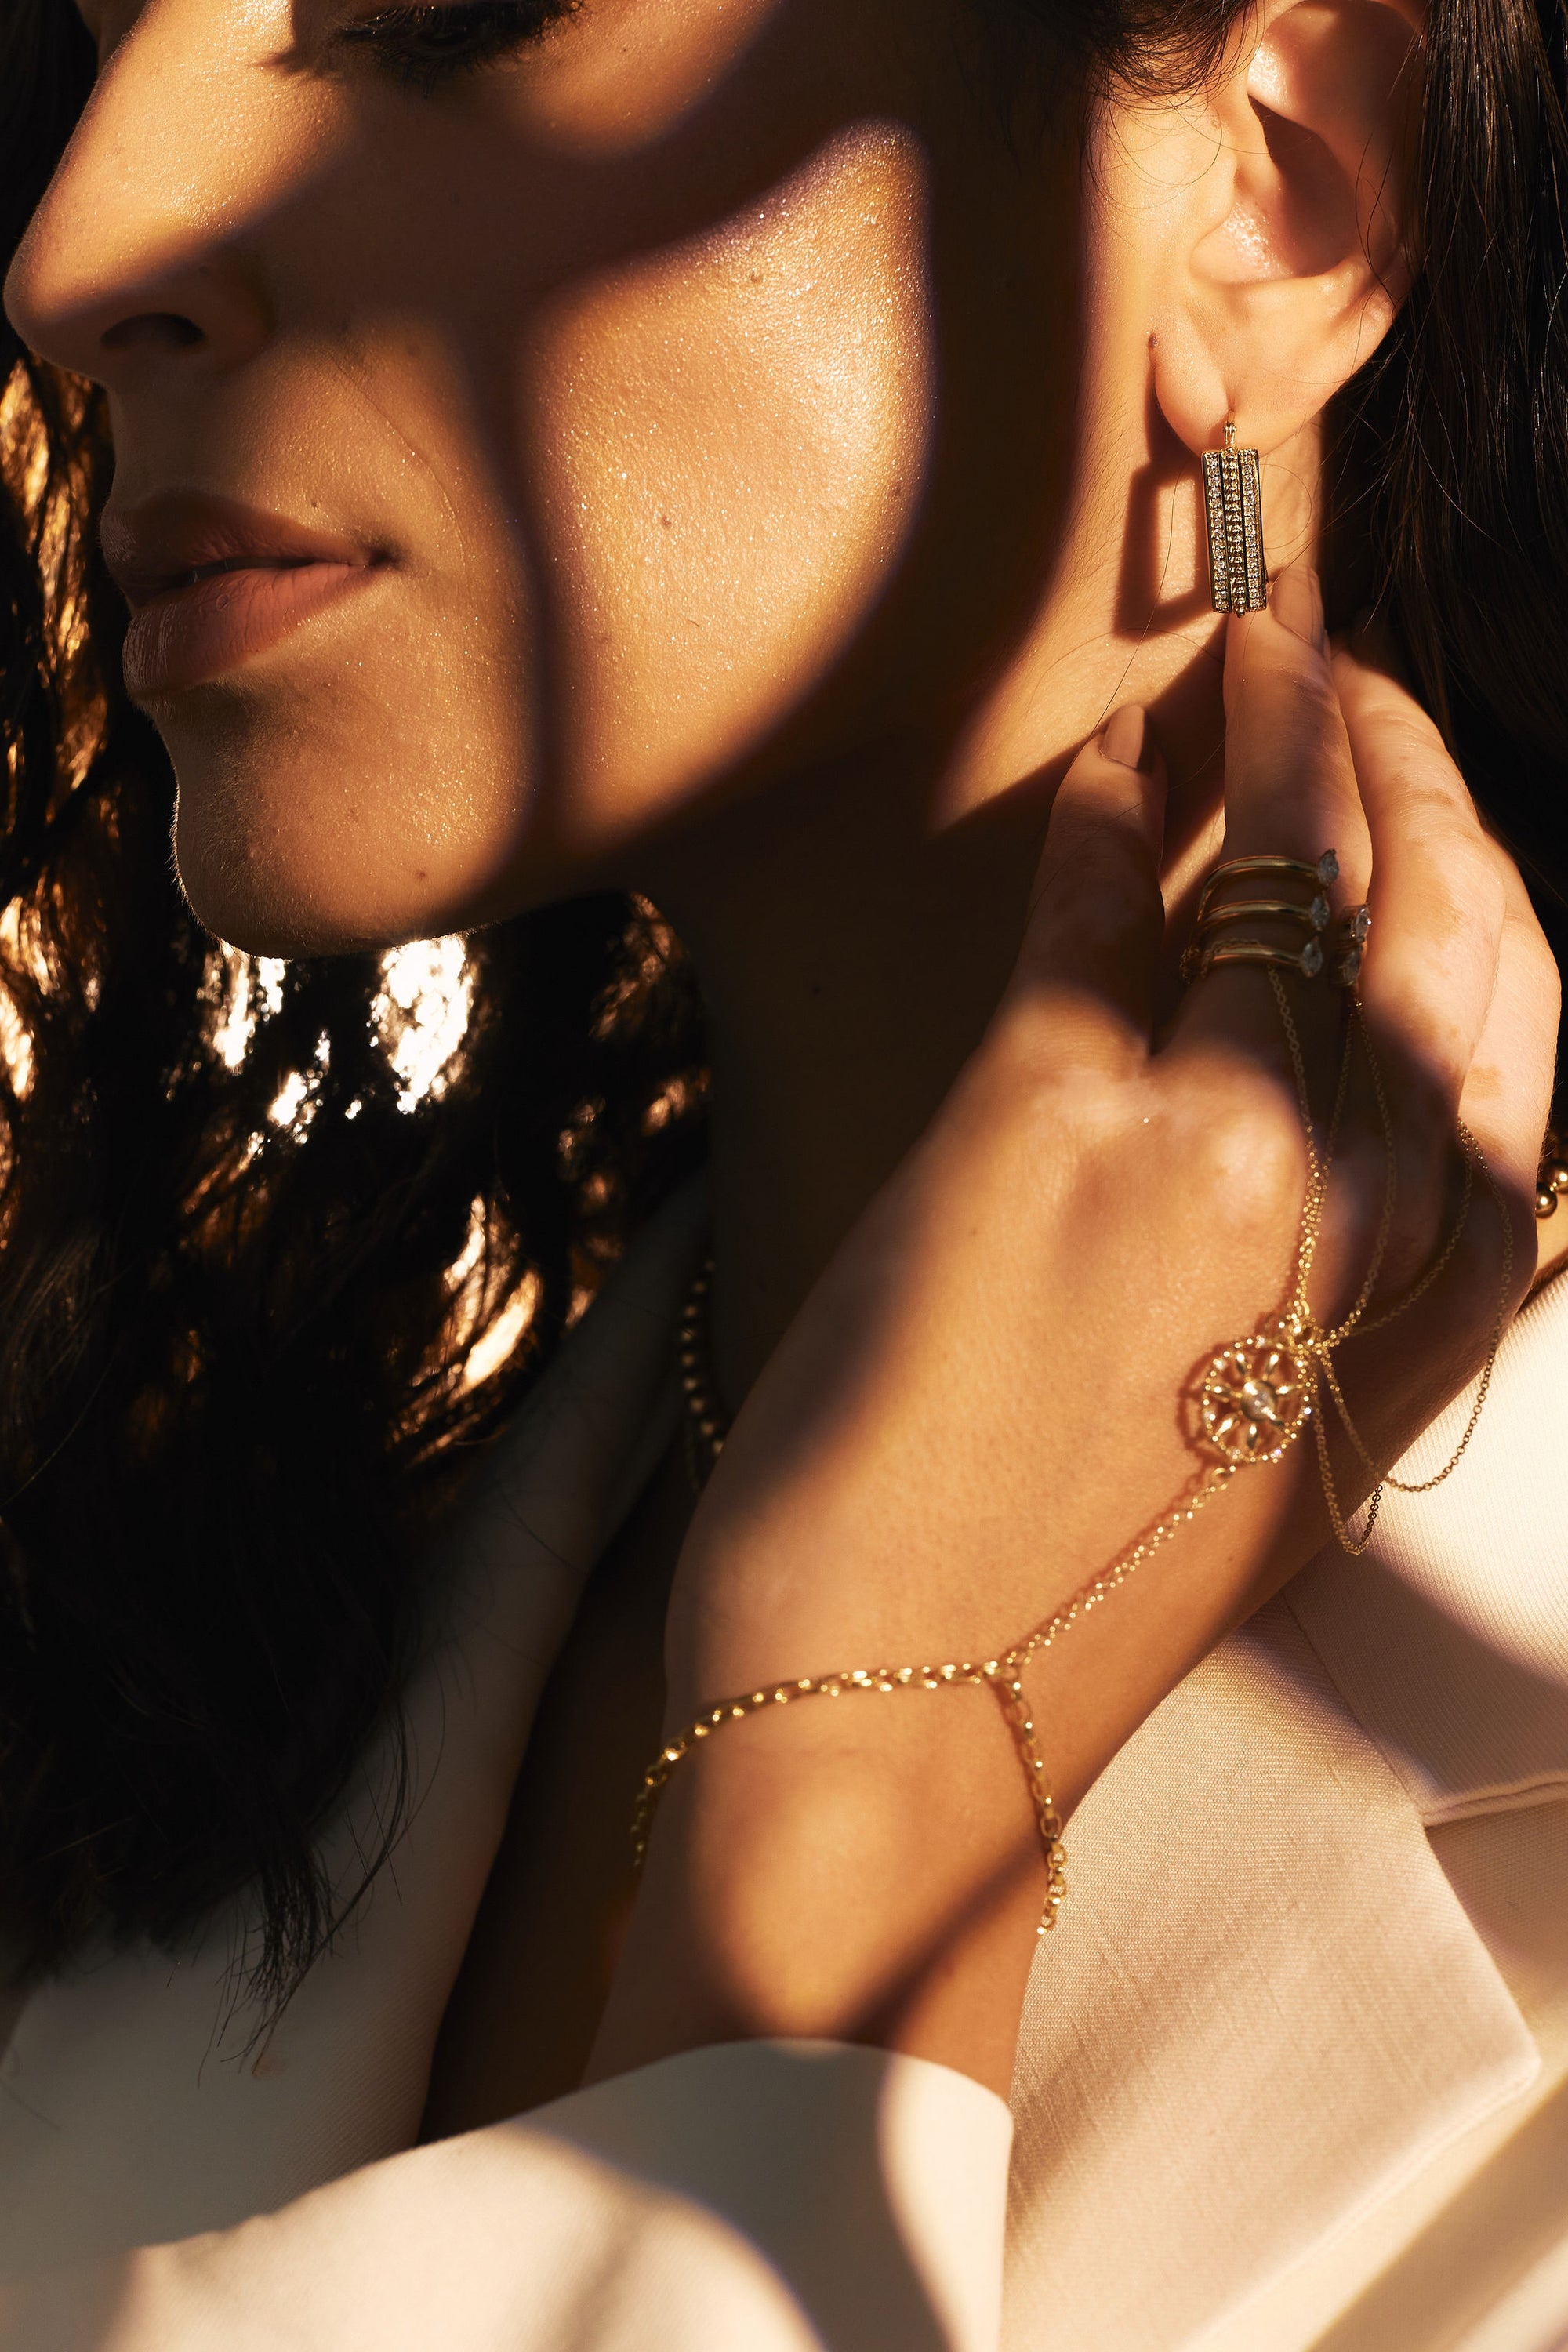 Close-up of a woman showcasing her jewelry. She wears an ear stack with Nijma M Fine Jewelry's Diamond Plaza - Square Hoop Diamond Earrings, a delicate necklace with a circular pendant, several rings, and a bracelet-ring chain. The lighting casts dramatic shadows on her face and hand, highlighting the shimmer of her natural diamond accessories.